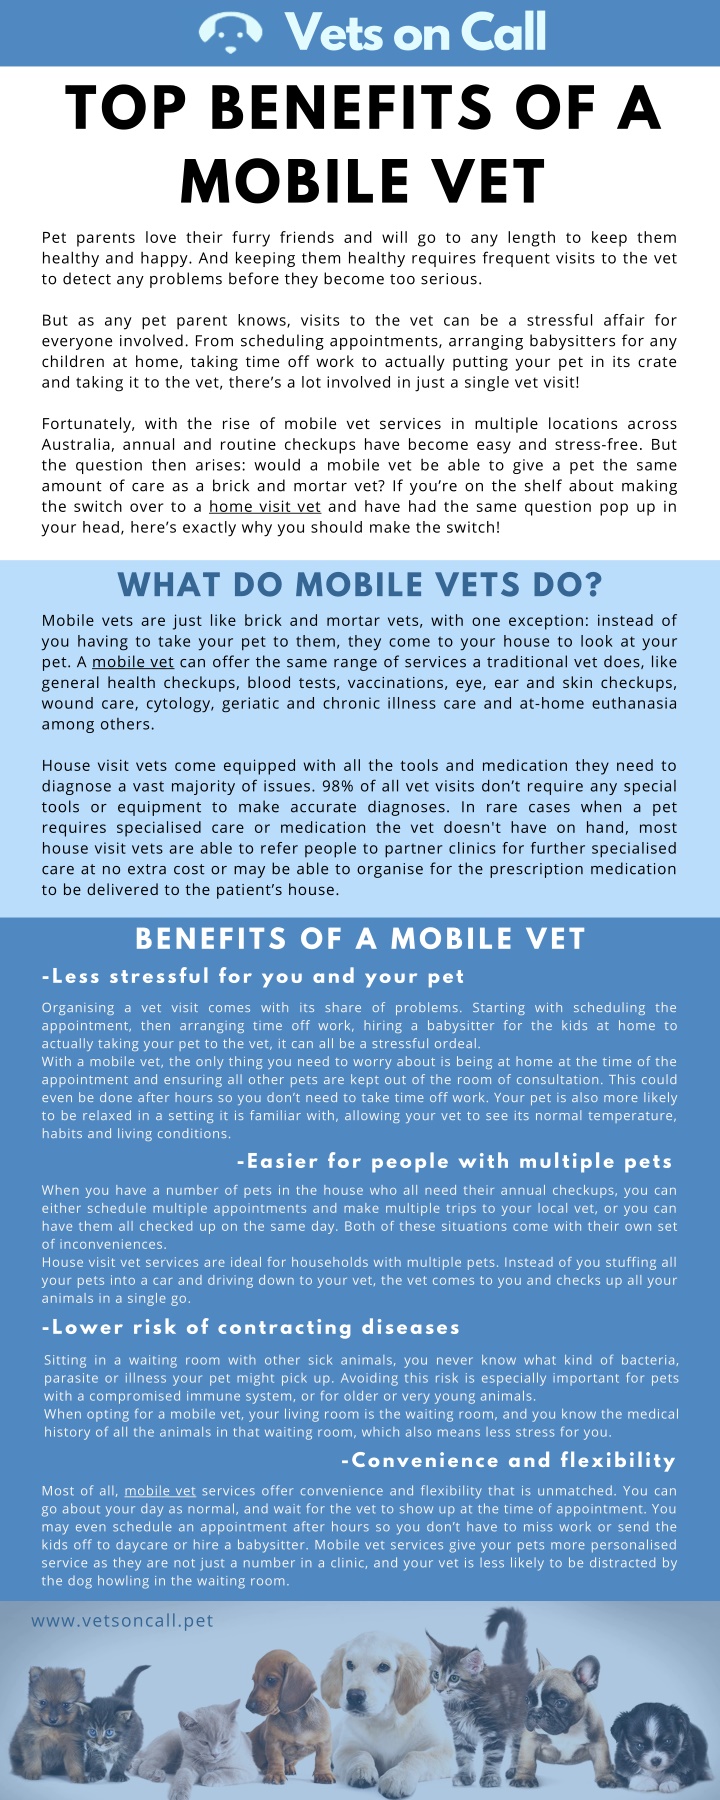 vets on call